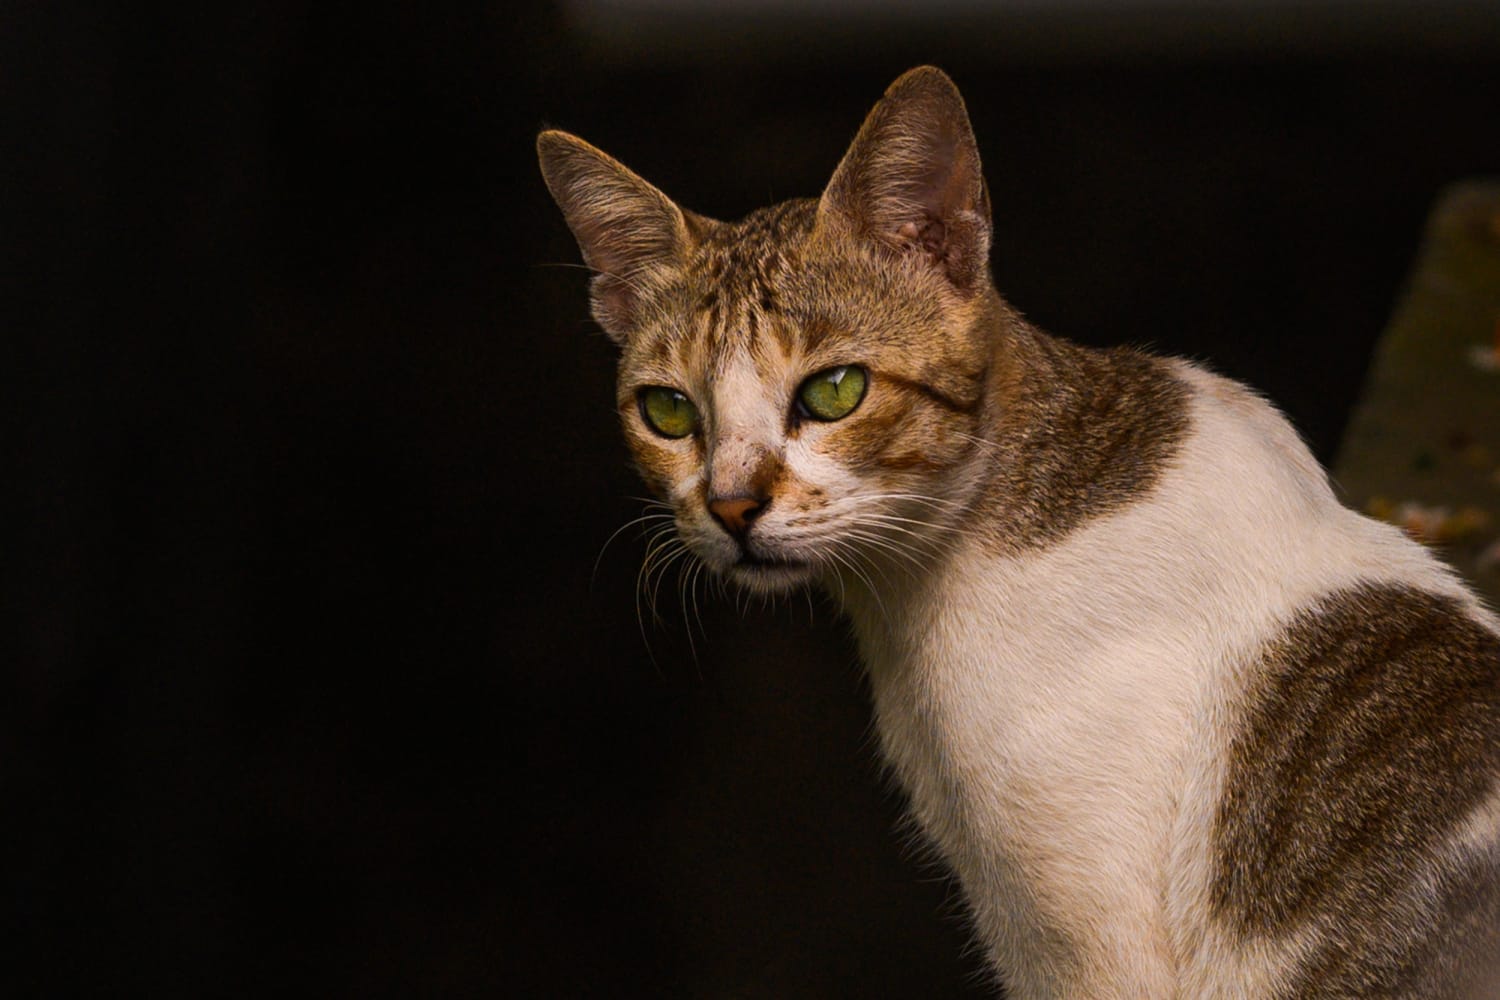 The first case of human plague in Oregon in 8 years likely came from a cat